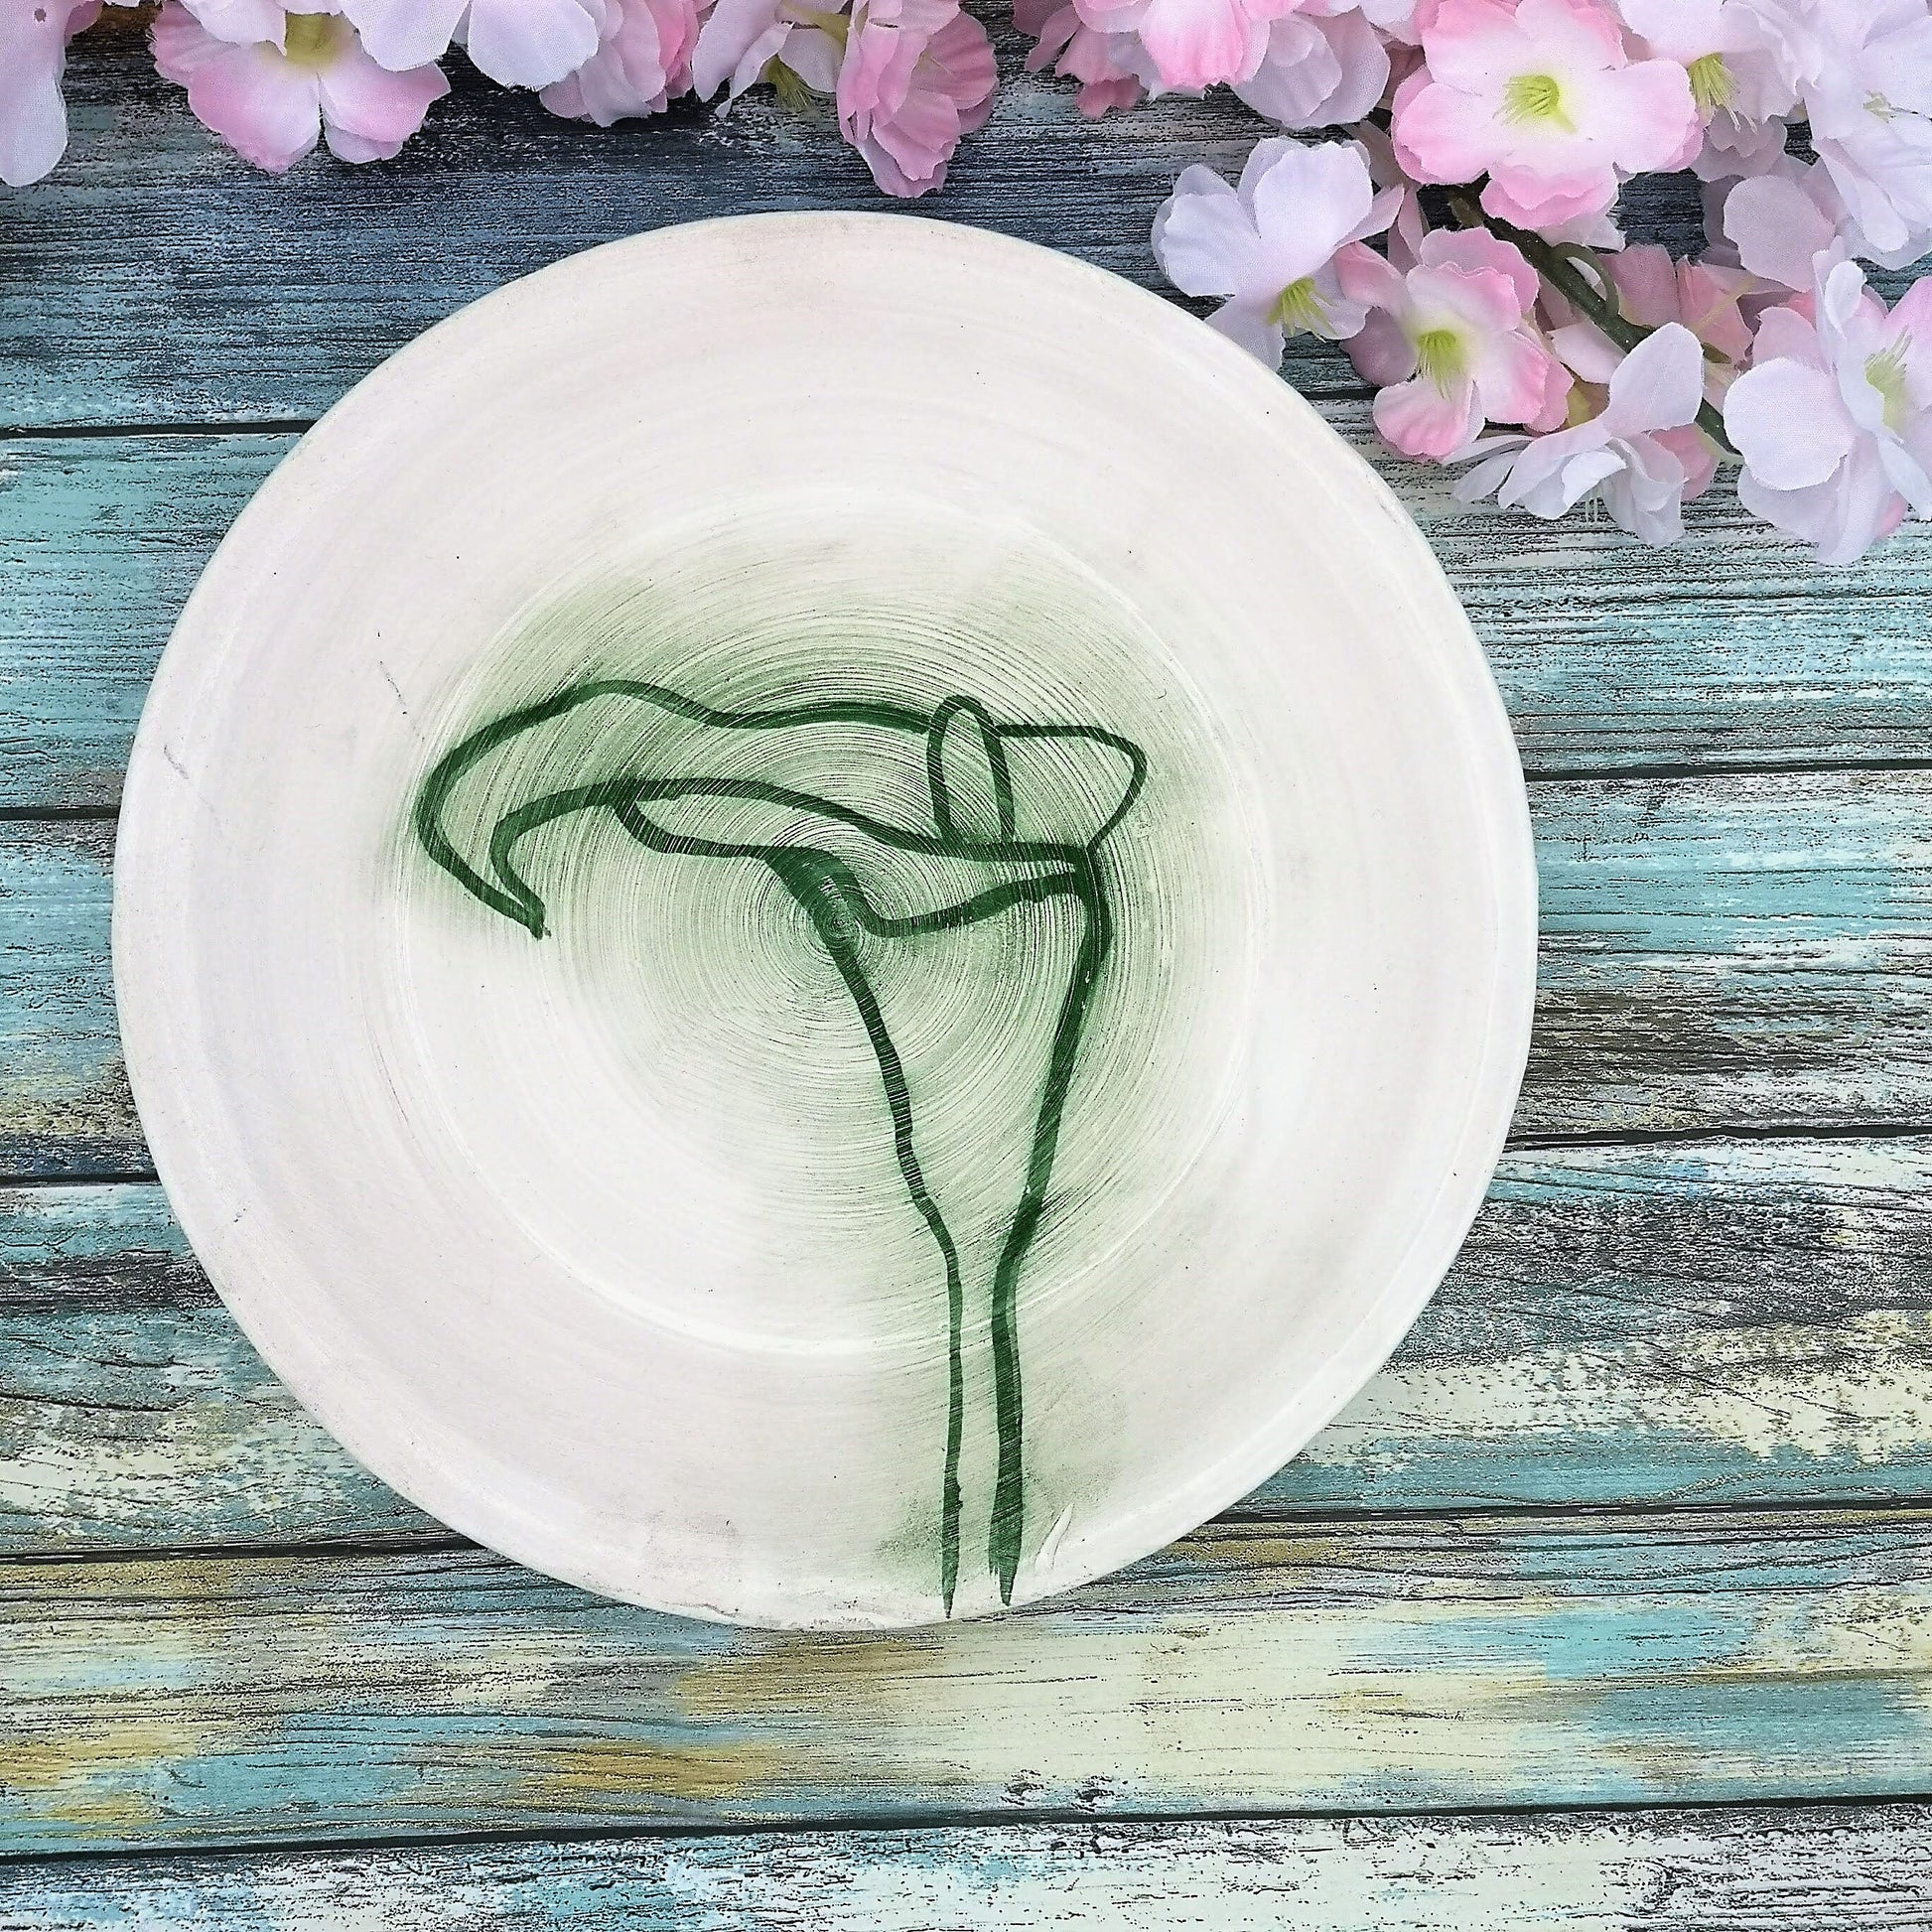 Handmade Ceramic Round Plate Hand Painted Calla Lily, Portuguese Pottery Wall Decor Use For Serving Dish, Unique Dinner Plates For Display - Ceramica Ana Rafael